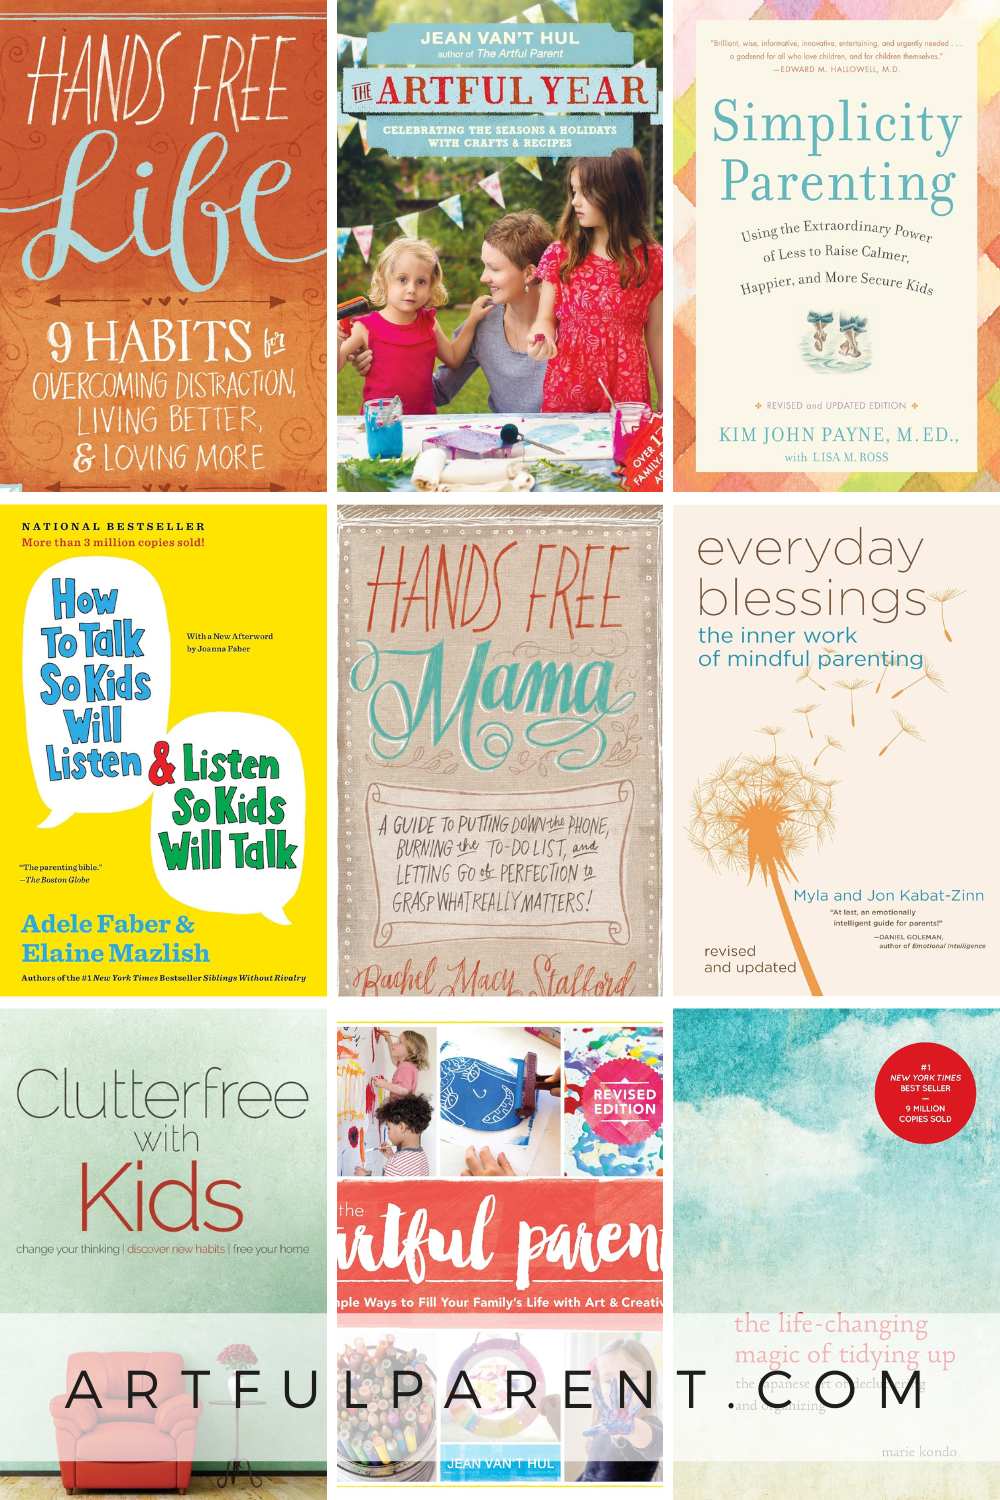 The Best Parenting Books for Connecting, Simplifying, and Making Time